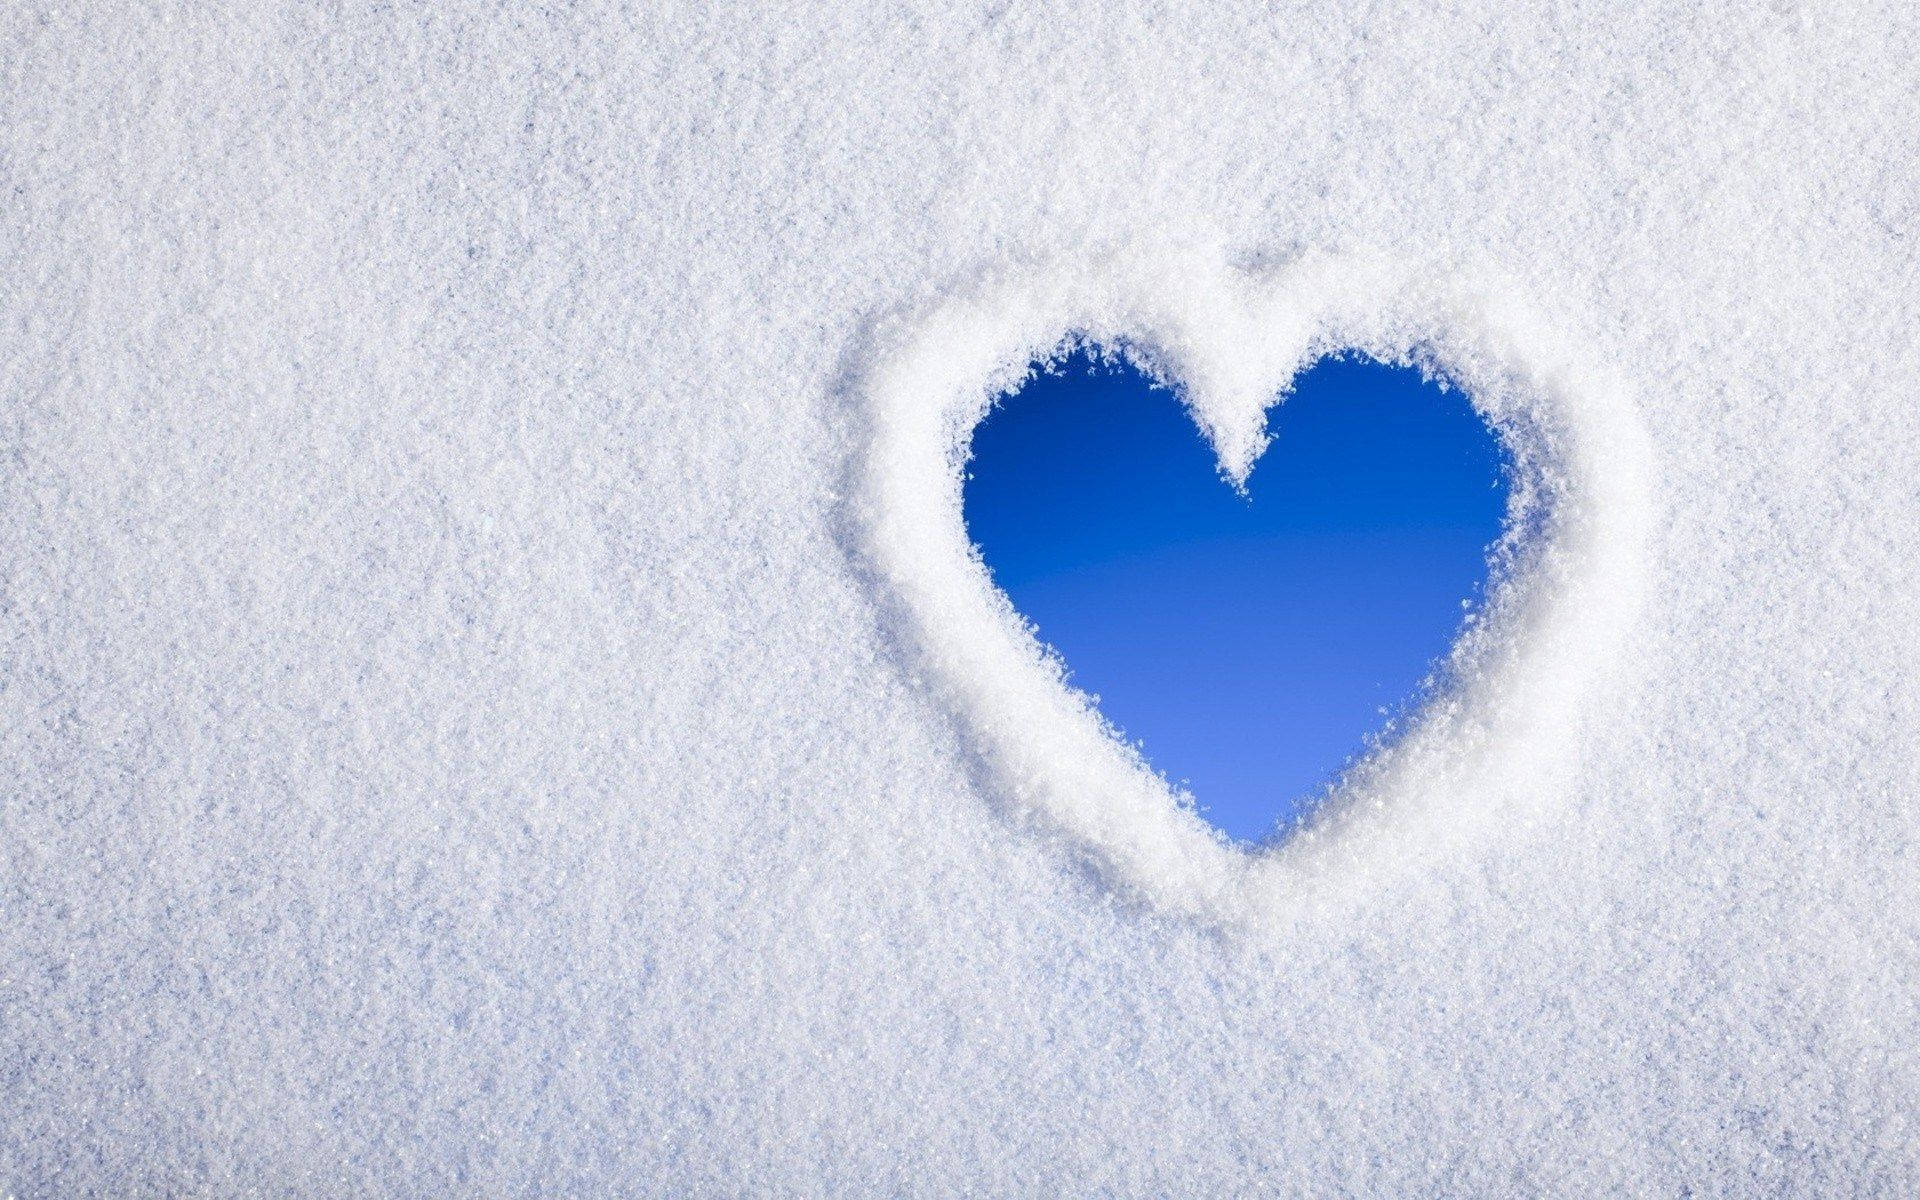 Blue Heart In White Snow Background